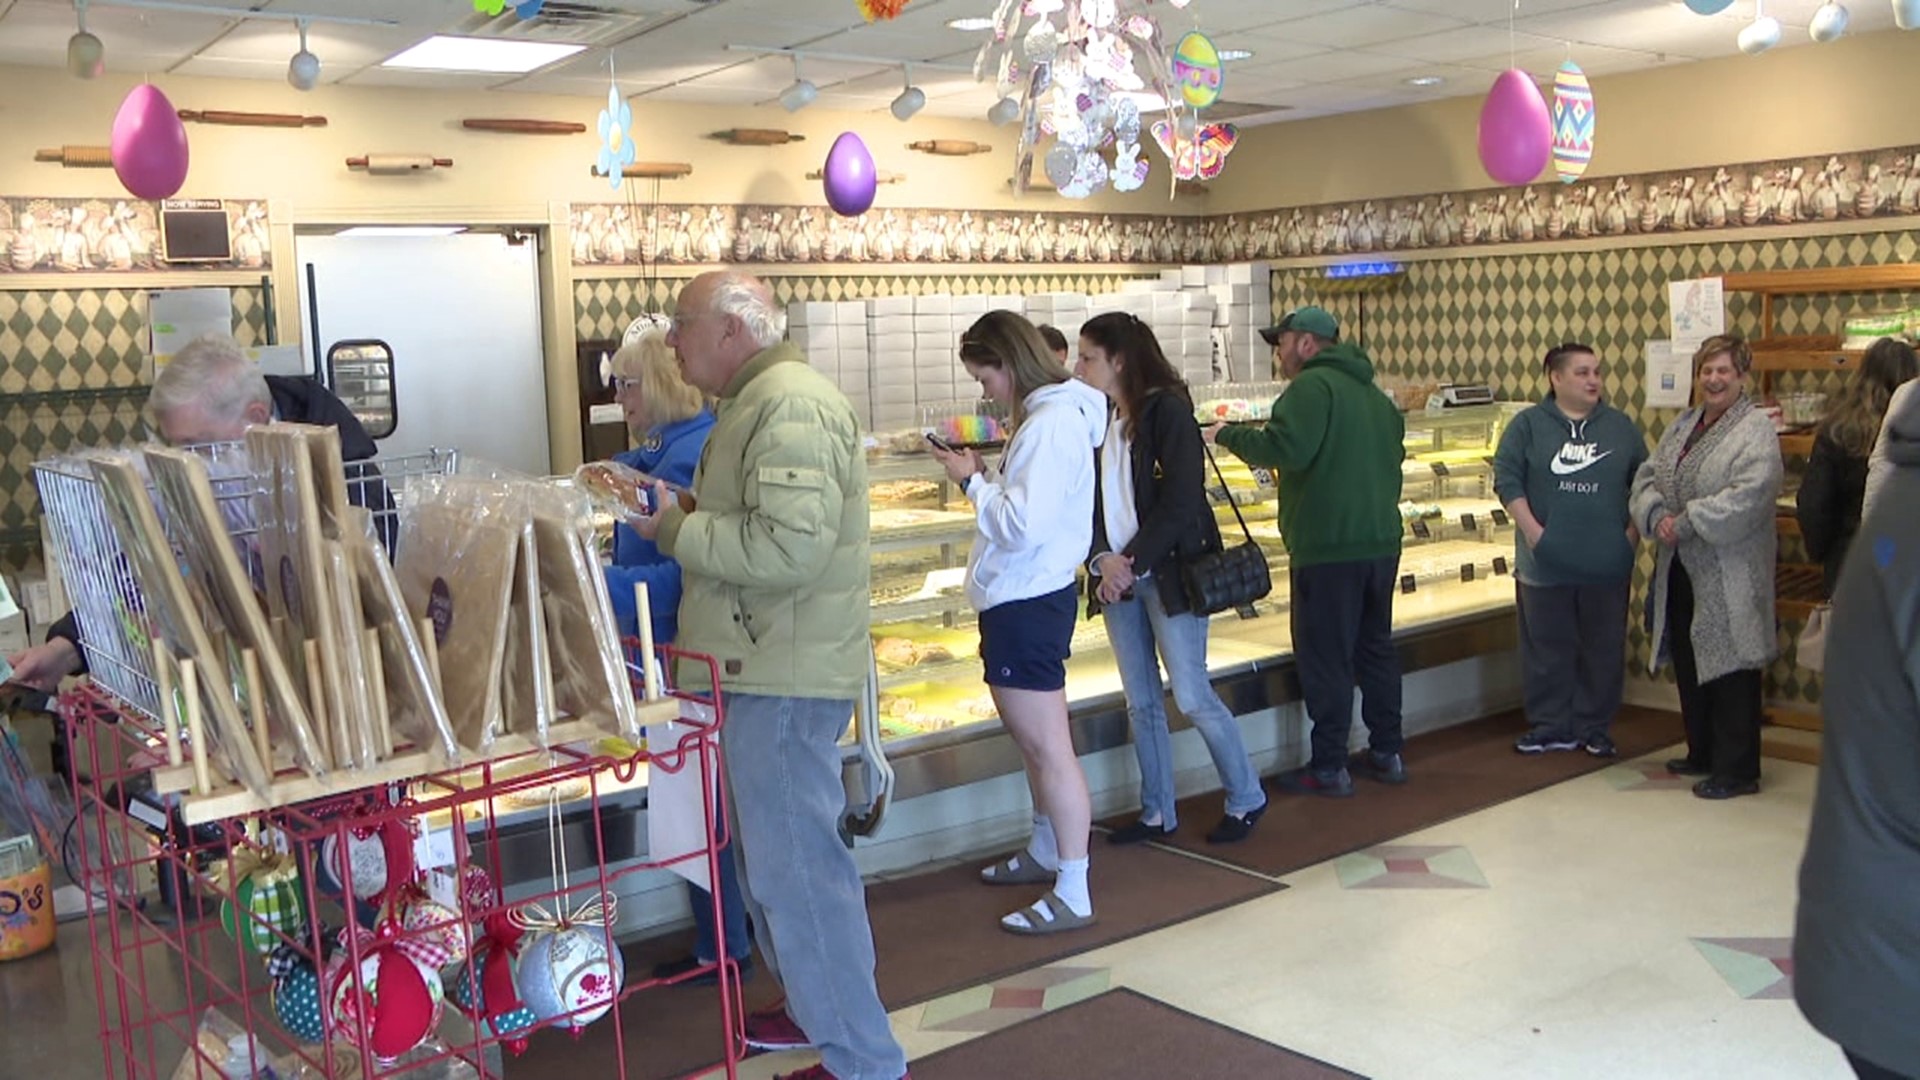 Plenty of people were still doing some holiday shopping in Moosic on Saturday.